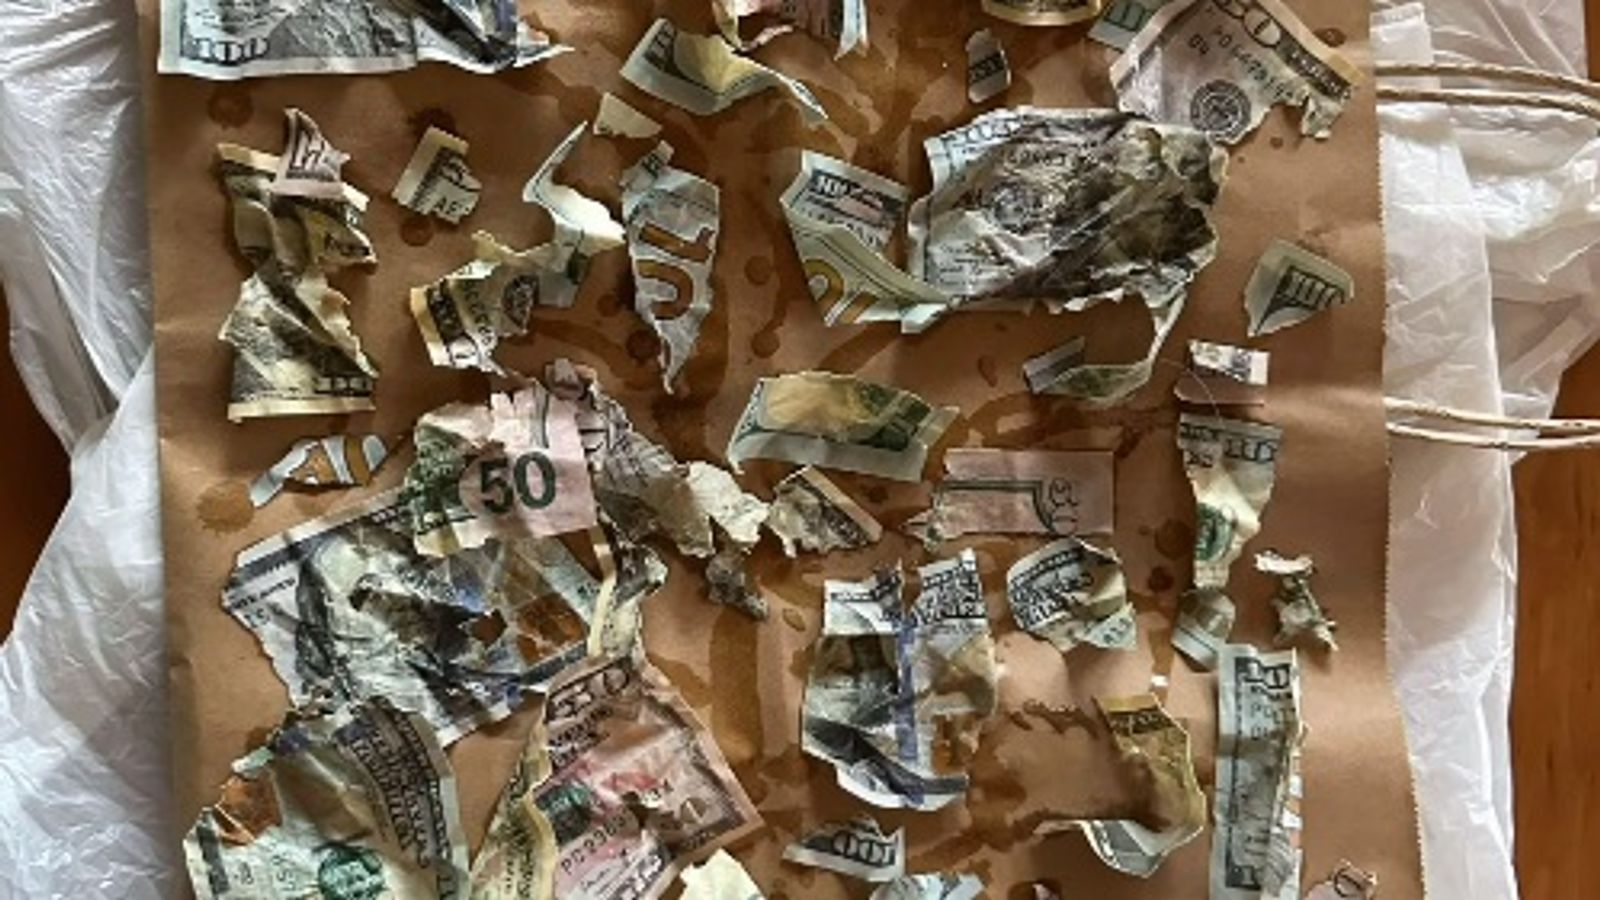 The couple documented the painstaking process of trying to salvage as much of the money as they could